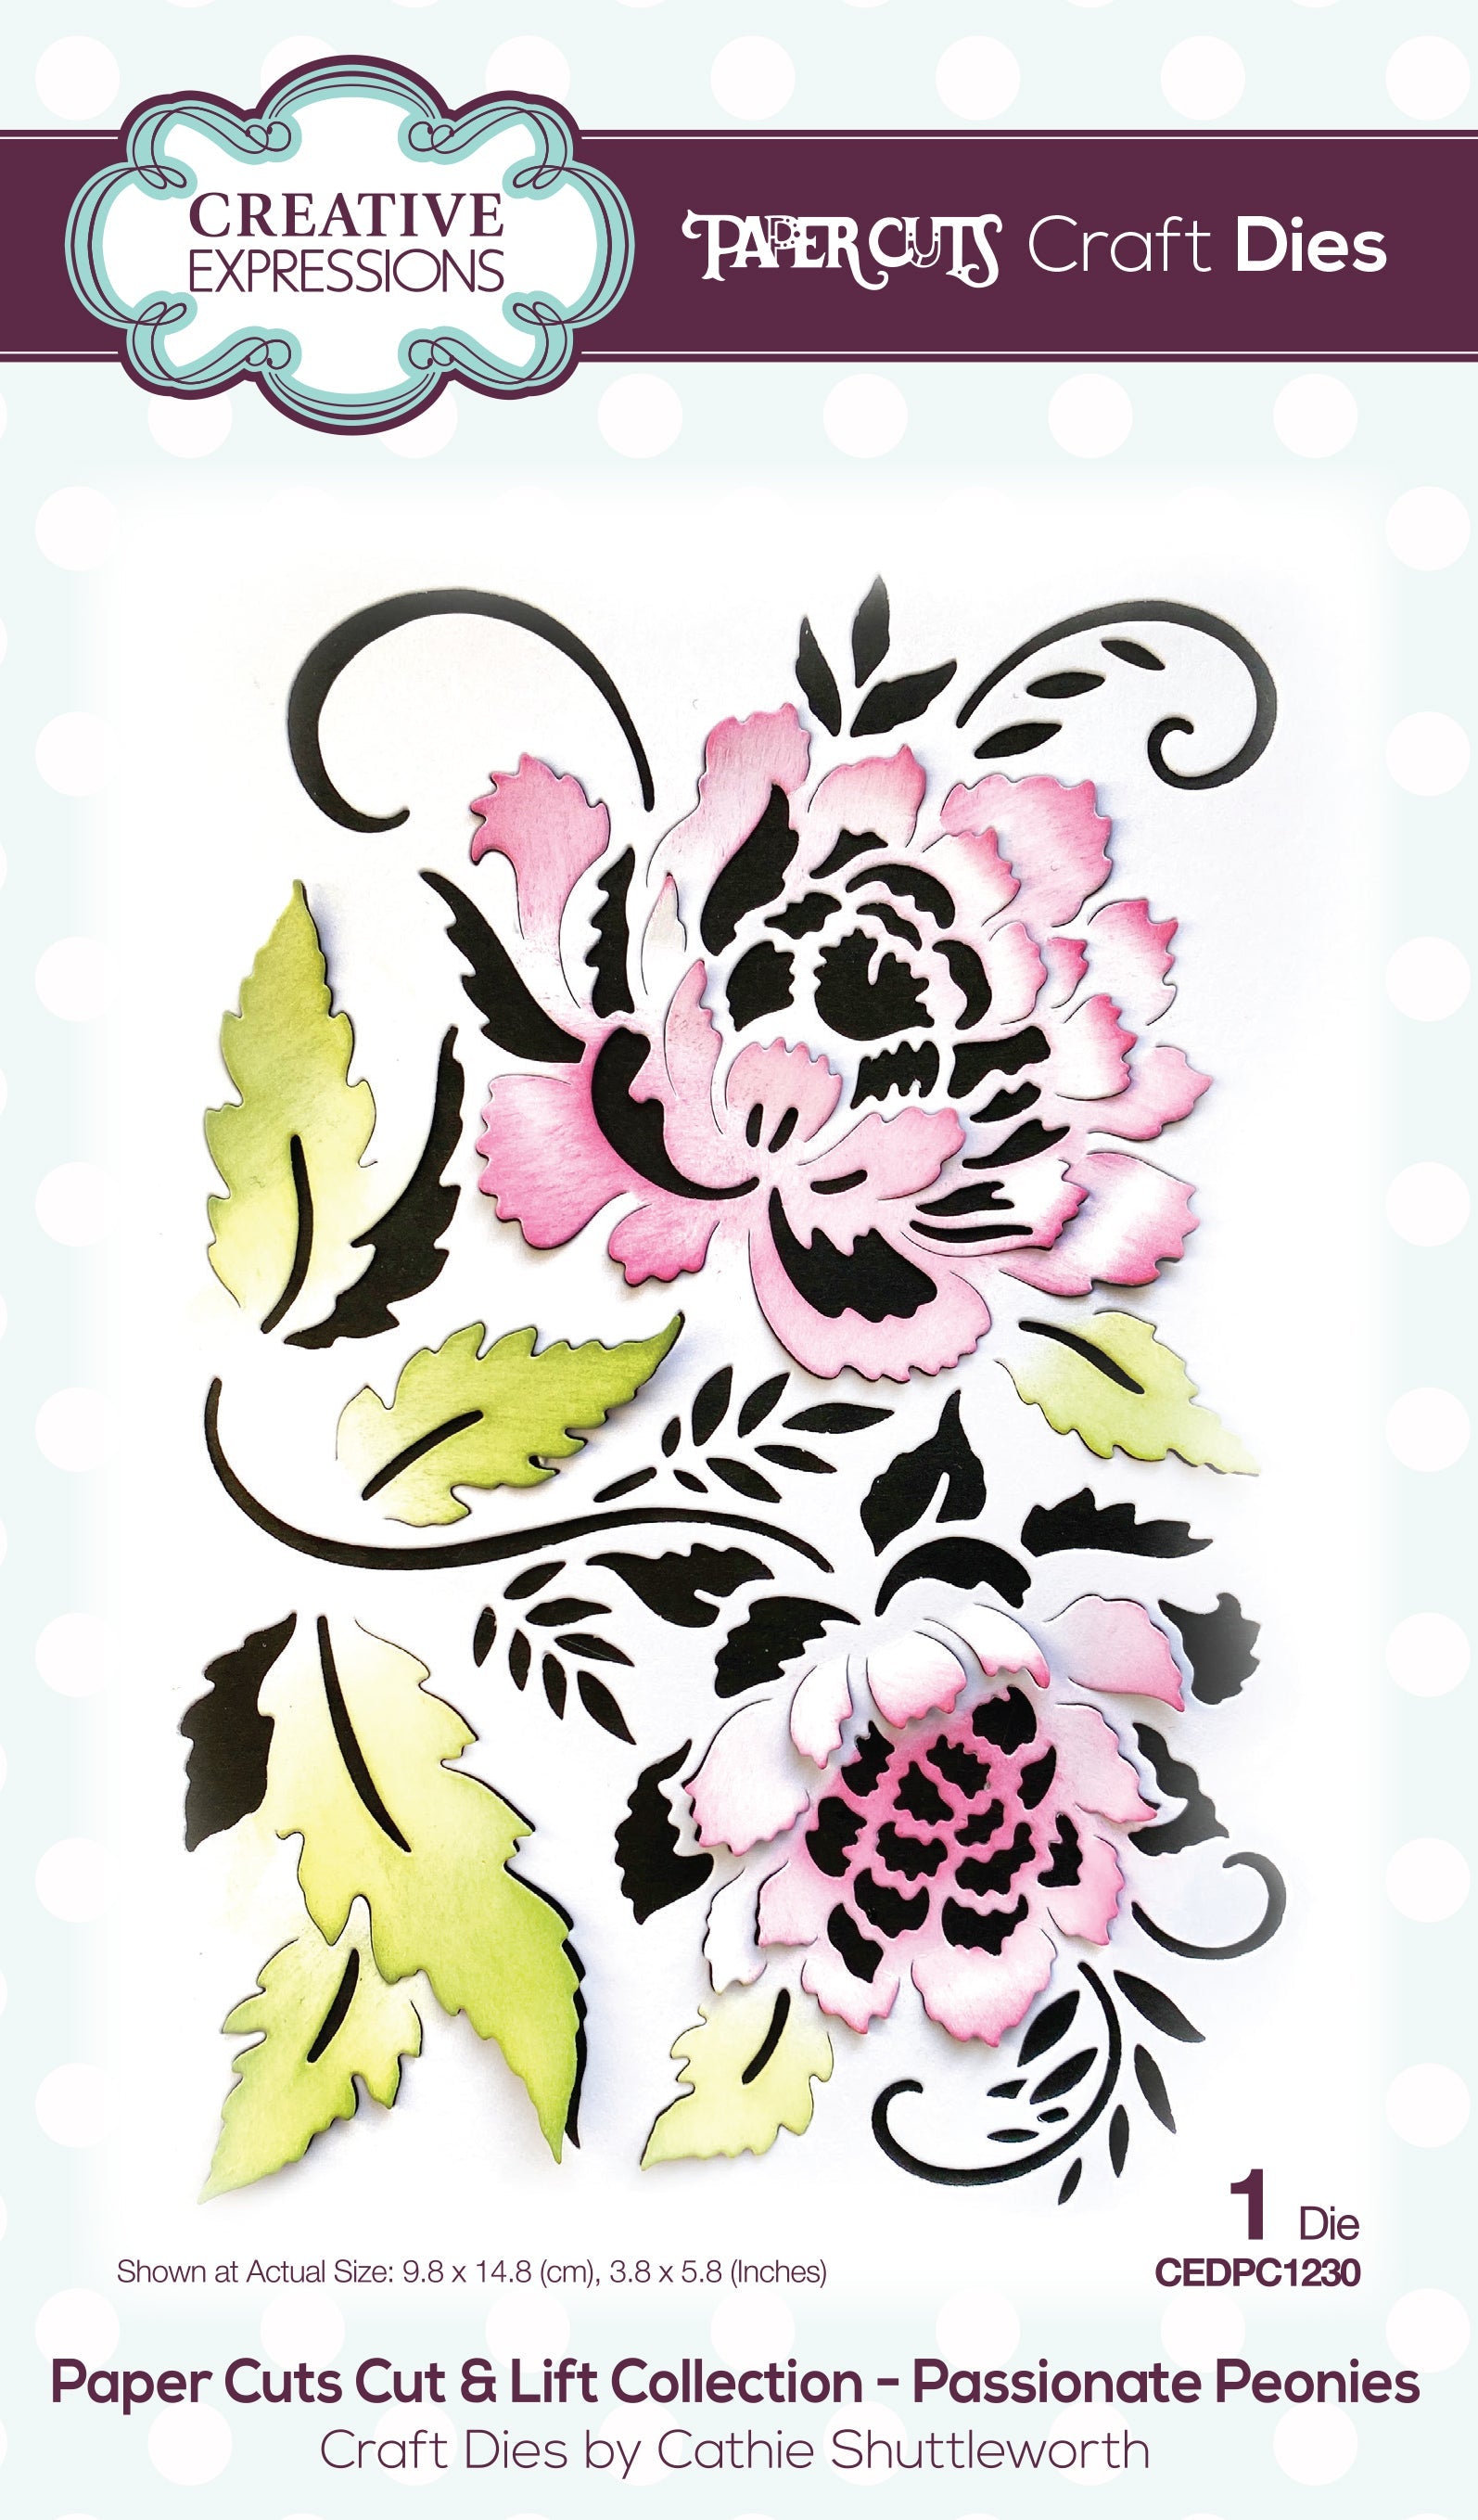 Creative Expressions Paper Cuts Cut & Lift Passionate Peonies Craft Die